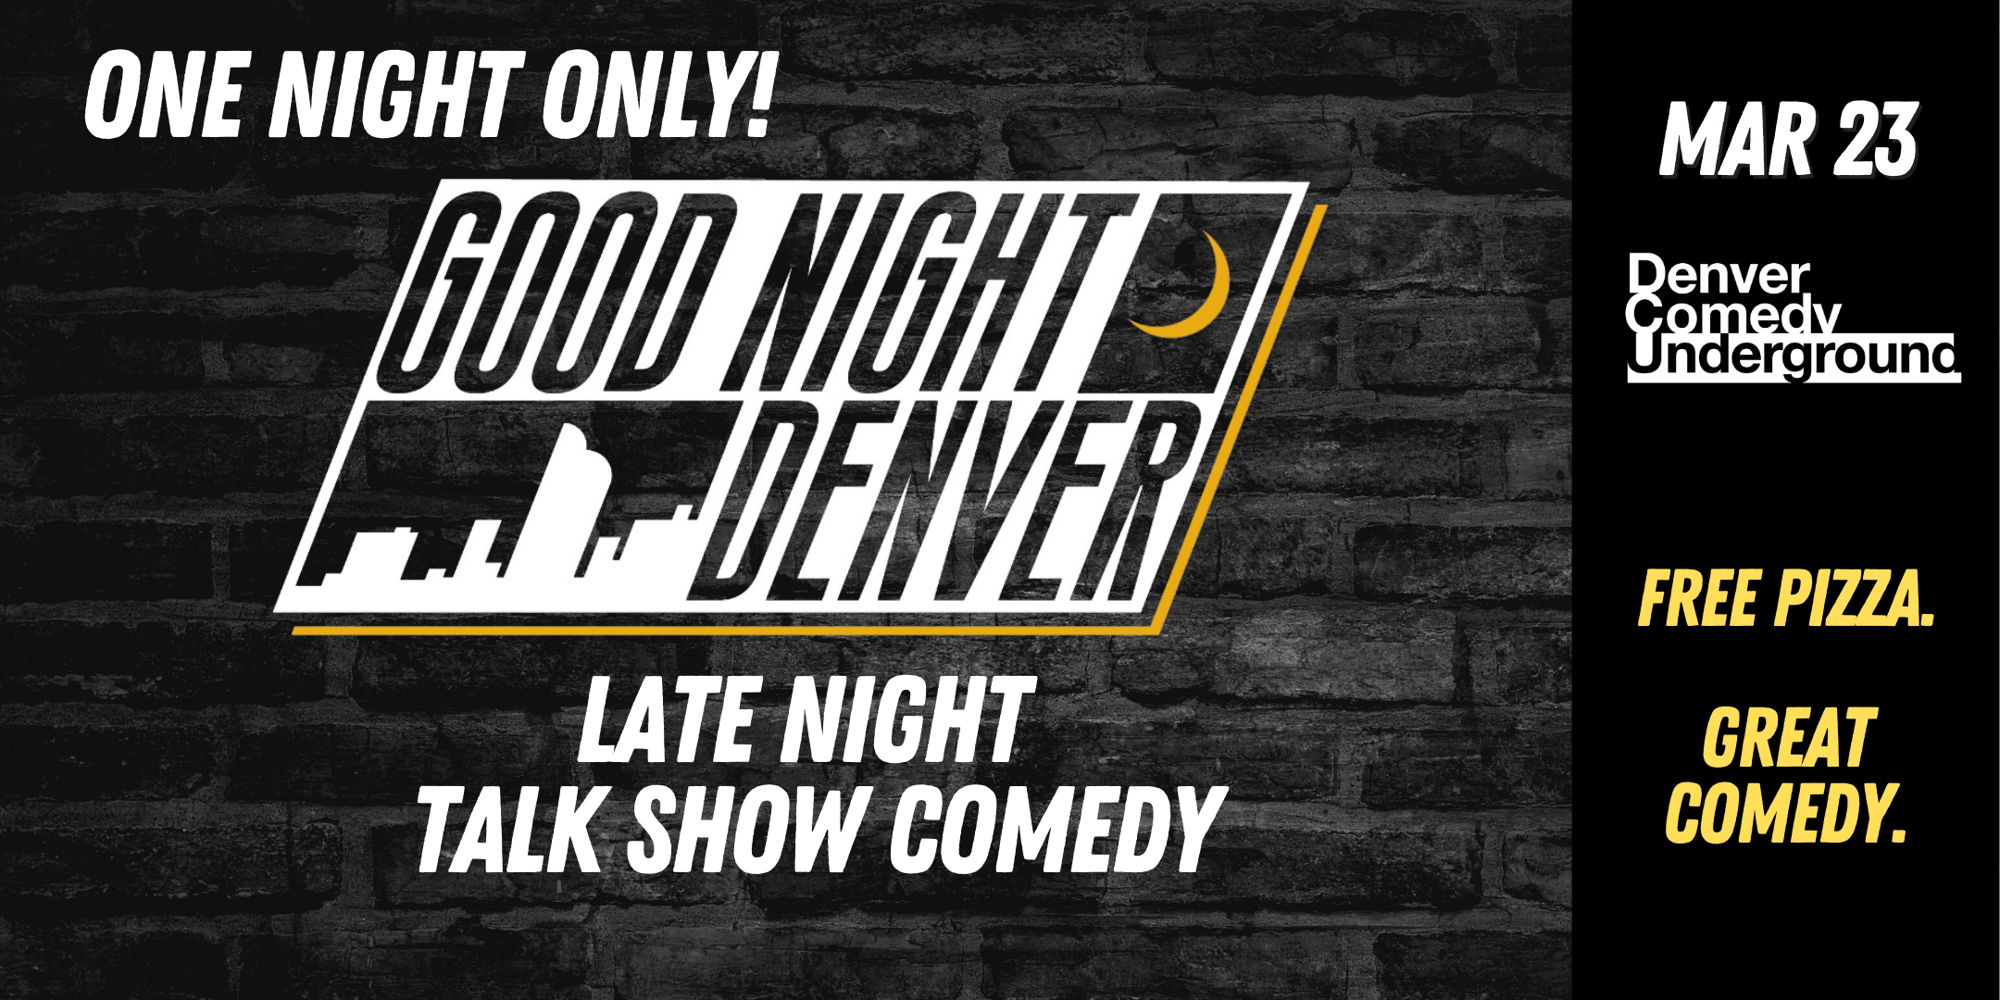 Goodnight Denver Late Night Talk Show Comedy at Denver Comedy Underground! Plus Free Pizza! promotional image